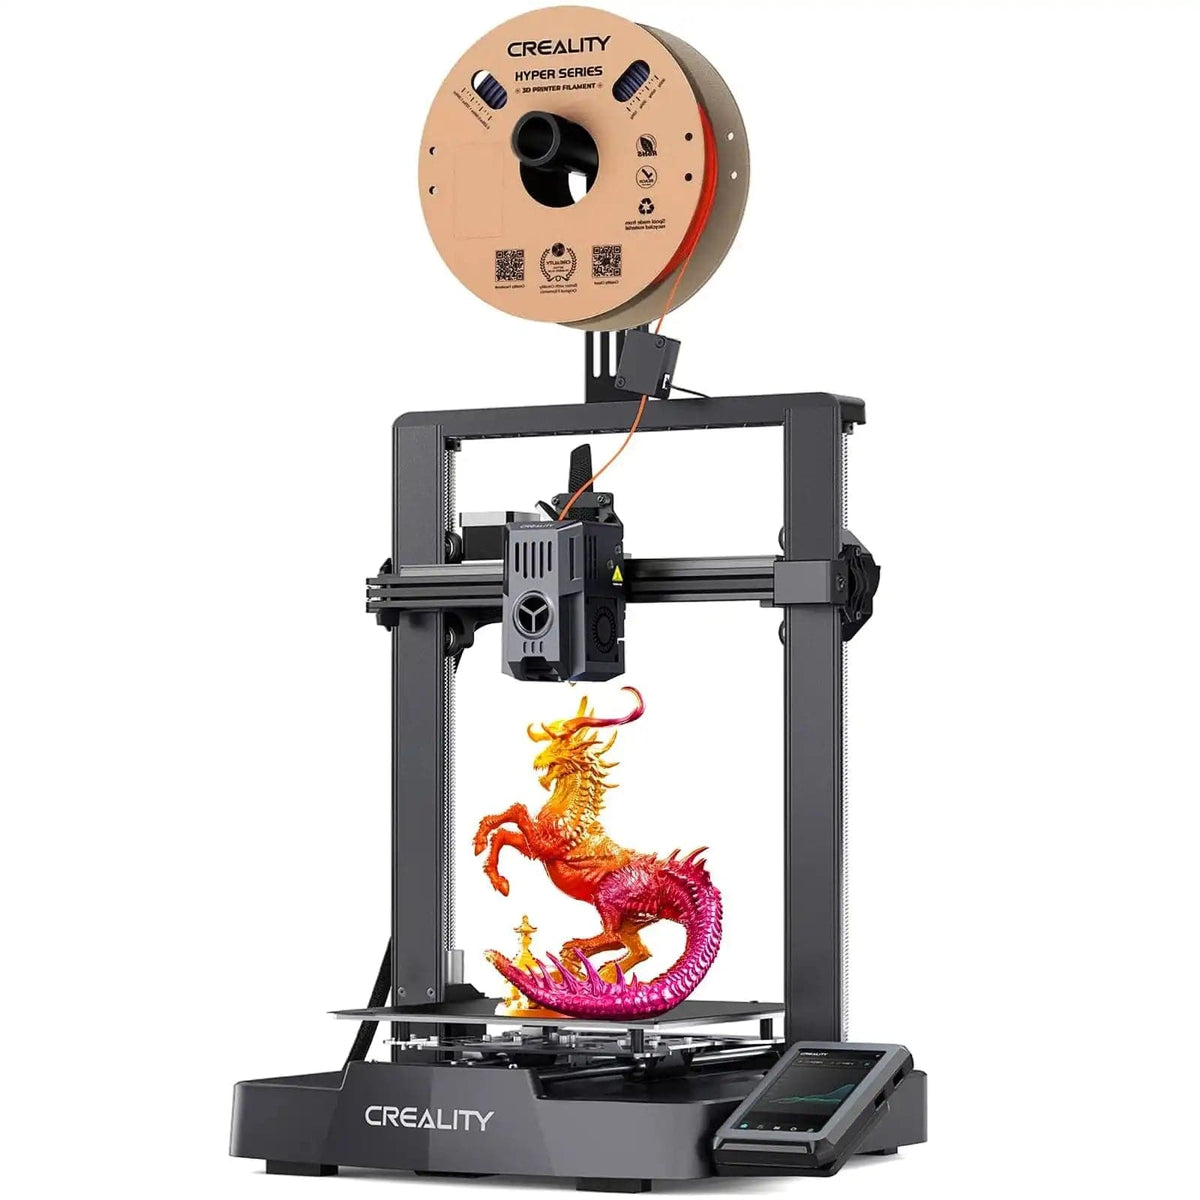 Creality Ender 3 V3 KE 3D Printer, 500mm/s High-Speed Printing, Print  Features:

【Ship From Amazon FBA Warehouse】Same shipping service with Amazon. Enjoy reliable performance and fast shipping with the Amazon FBA Warehouse.
【Smarter aCreality Ender 3 V3 KE 3D Printer, 500mm/3D Printer